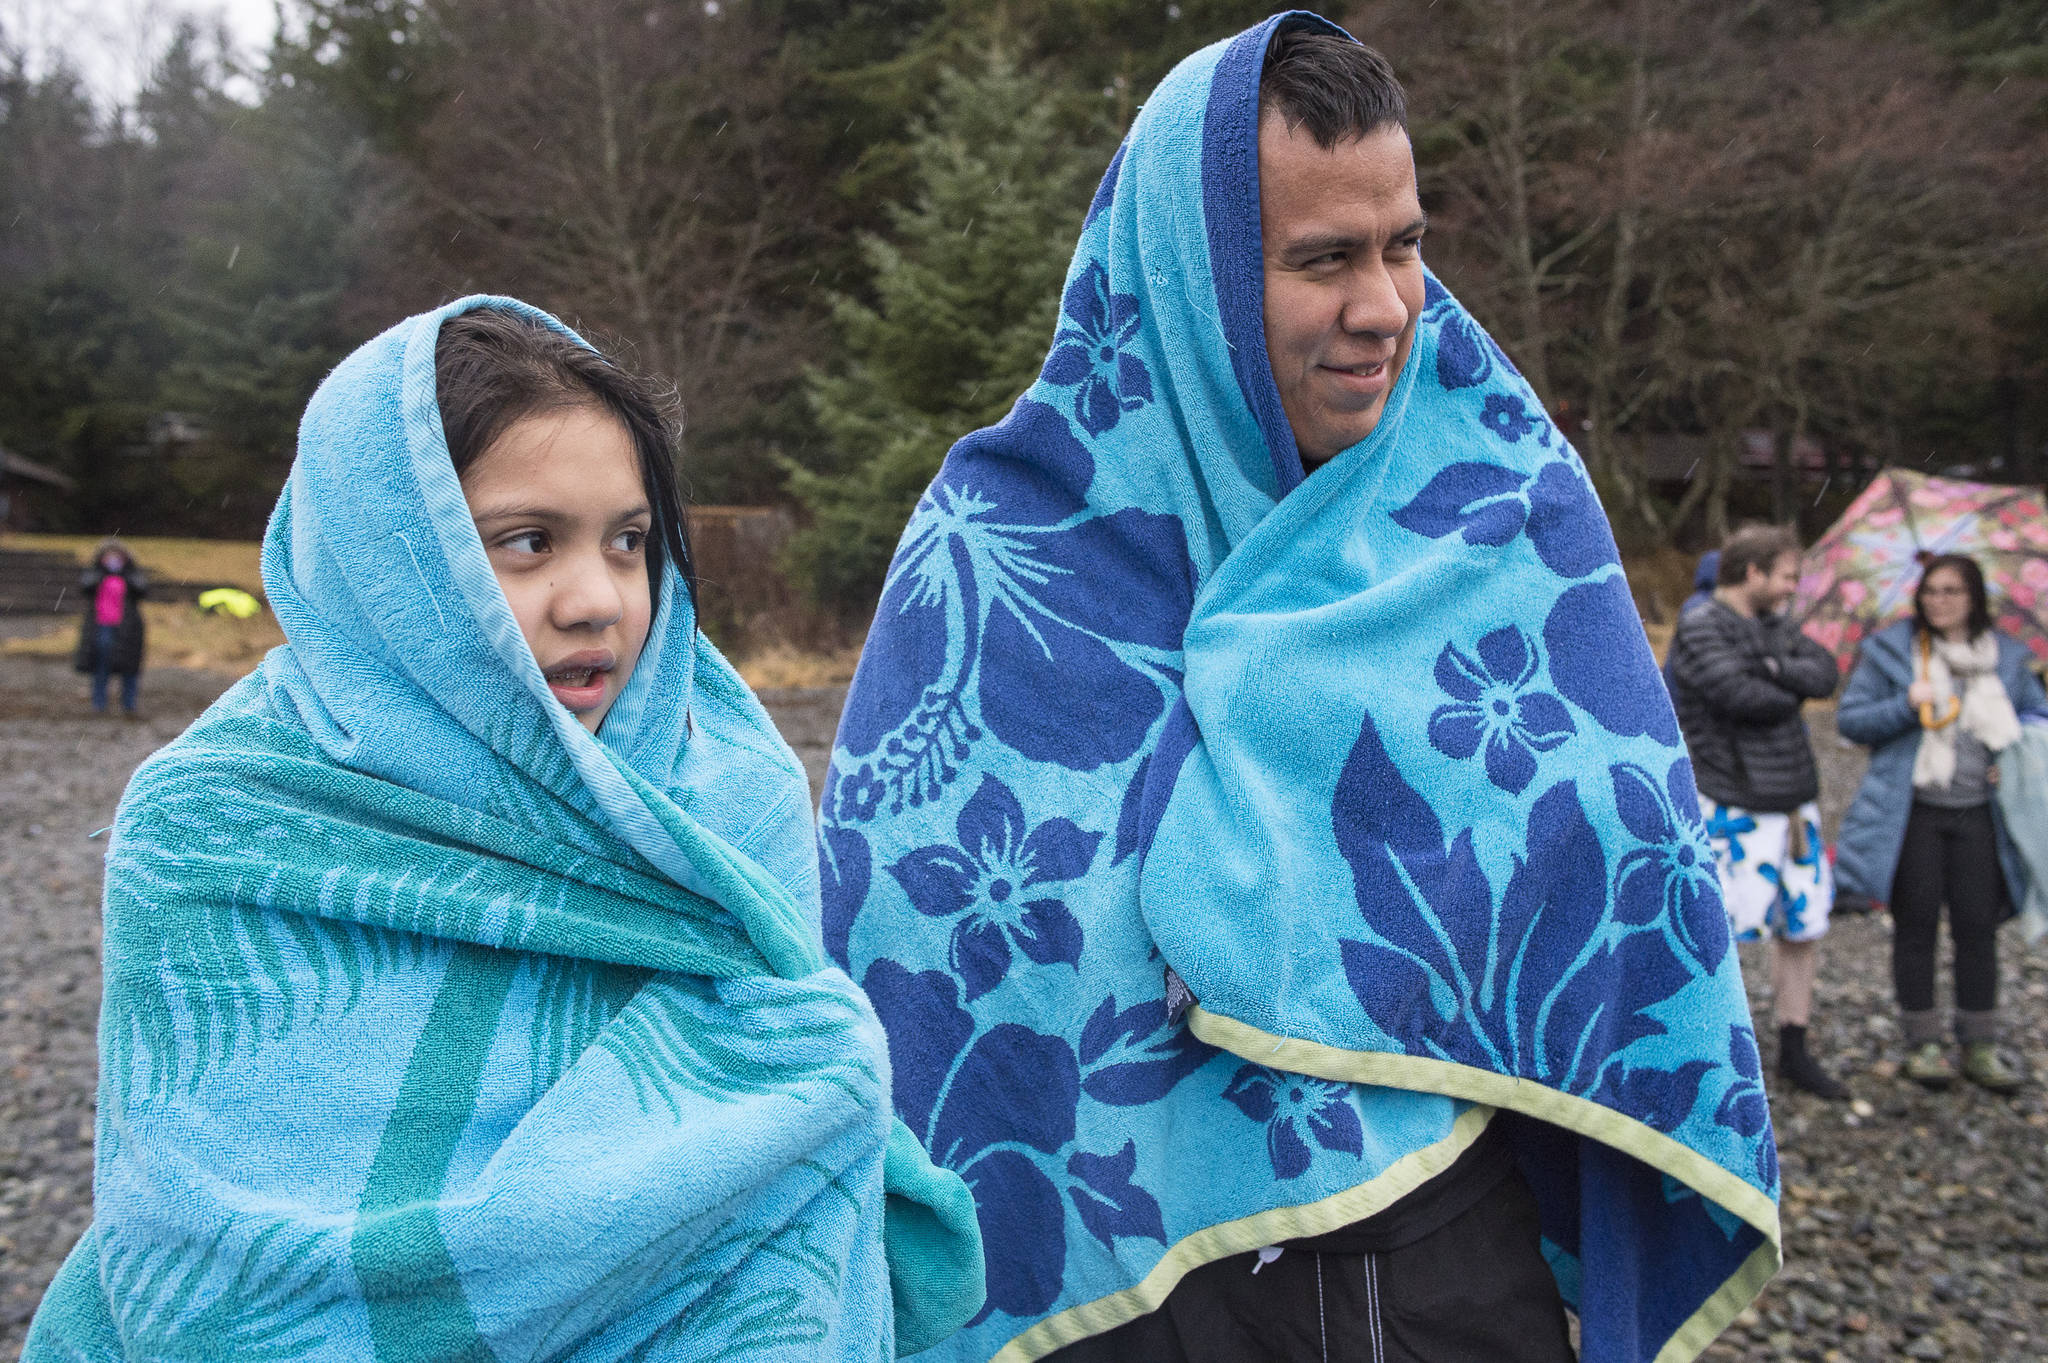 Shawn Jackson and his daughter, Sarah, 10, cover up in towels before taking to the frigid waters at Auke Bay Recreation Area for the annual Juneau Polar Bear Dip on Tuesday, Jan. 1, 2019. Nearly 200 people took the plunge to start off the new year. (Michael Penn | Juneau Empire)